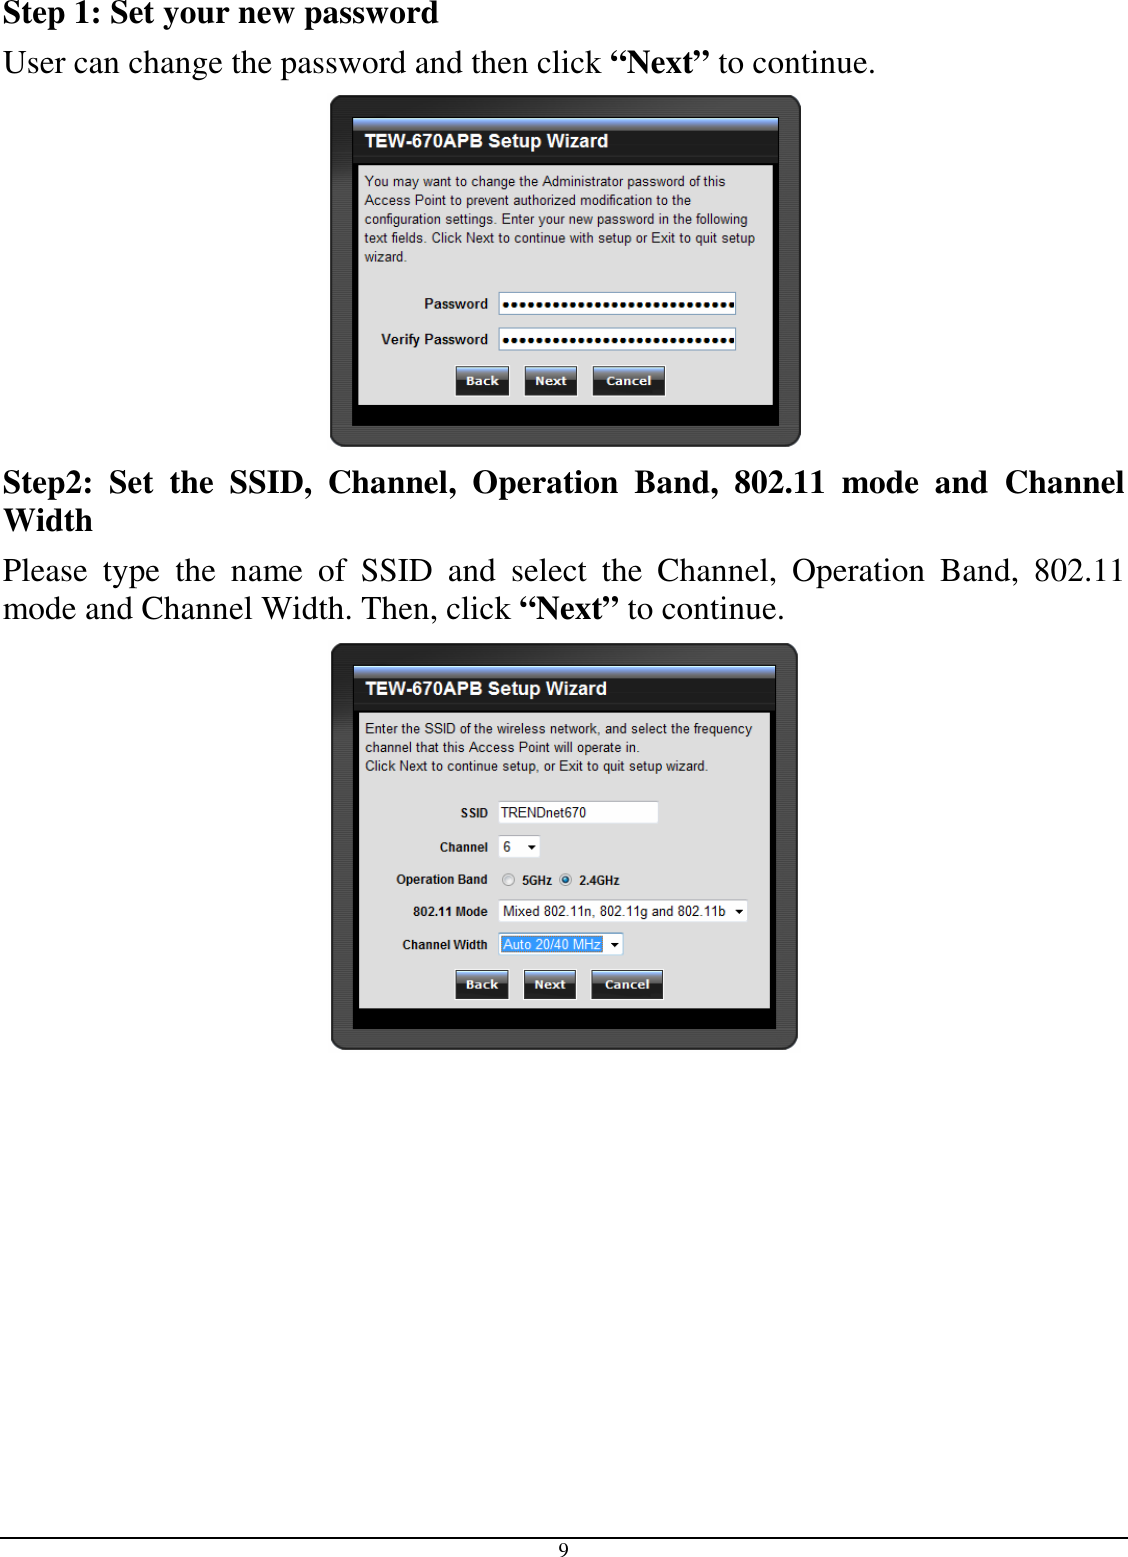  9 Step 1: Set your new password User can change the password and then click “Next” to continue.  Step2:  Set  the  SSID,  Channel,  Operation  Band,  802.11  mode  and  Channel Width Please  type  the  name  of  SSID  and  select  the  Channel,  Operation  Band,  802.11 mode and Channel Width. Then, click “Next” to continue.  